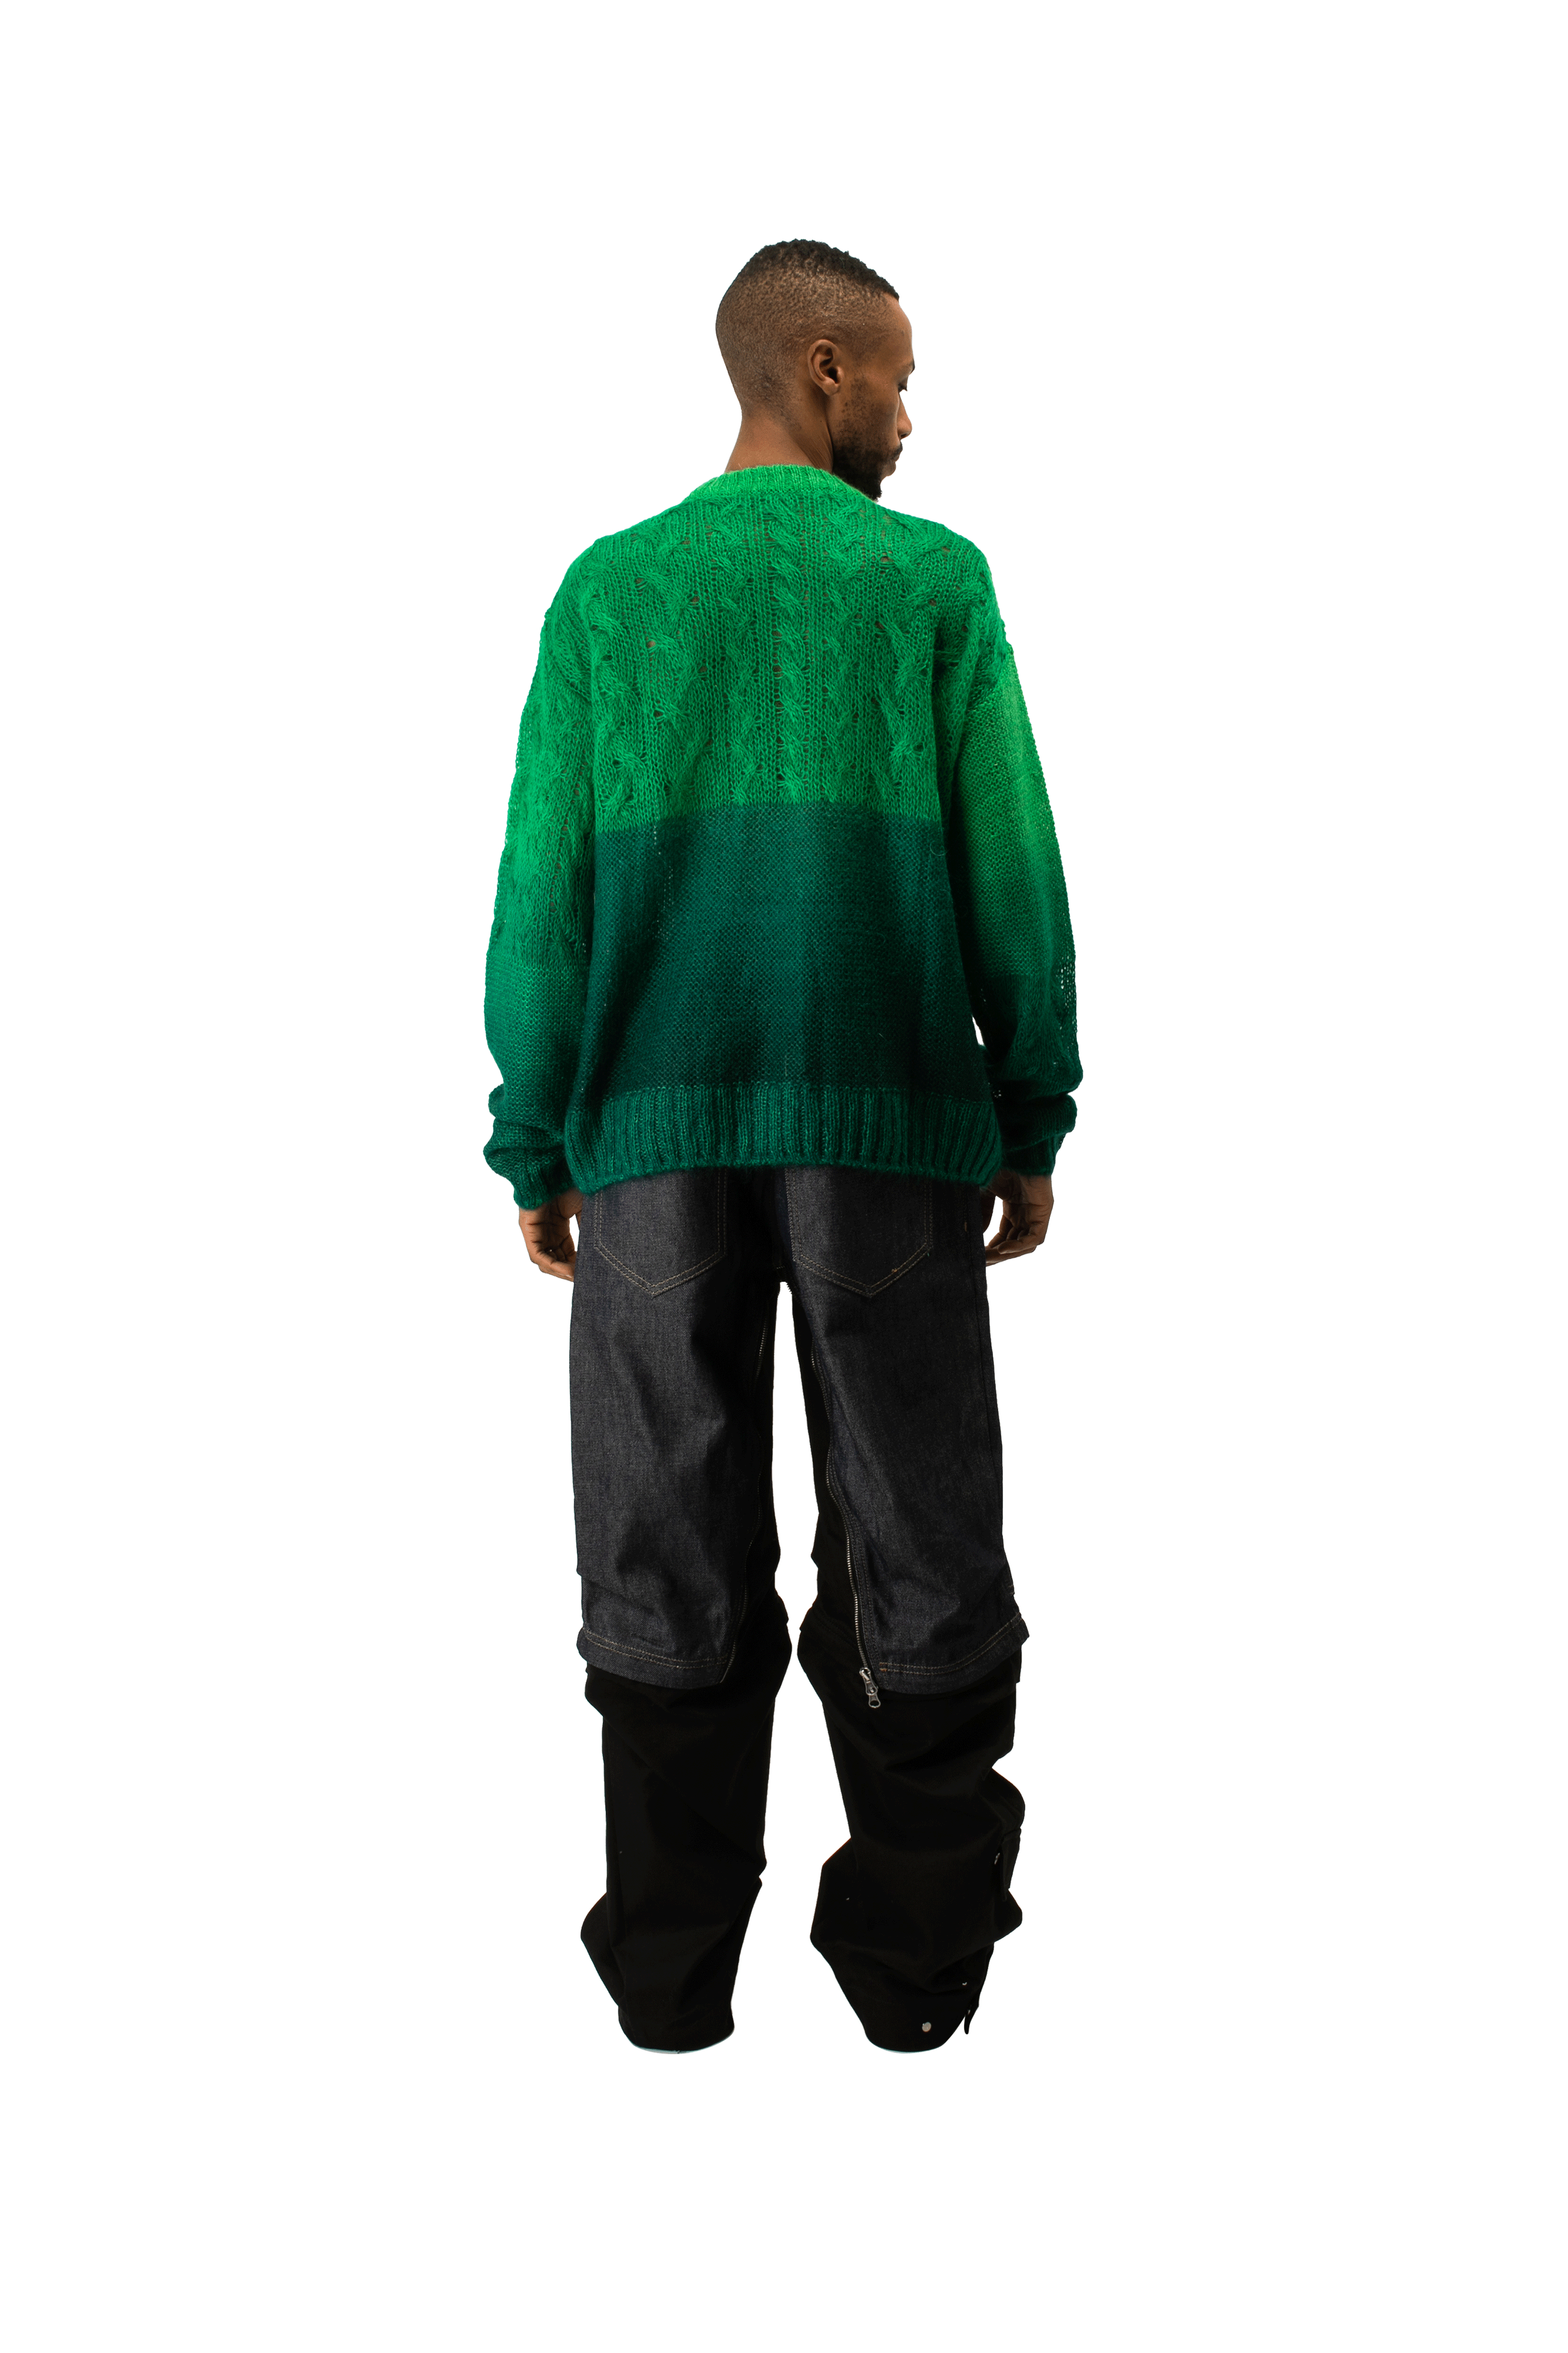 Foresk Mohair Crew-Neck Sweater